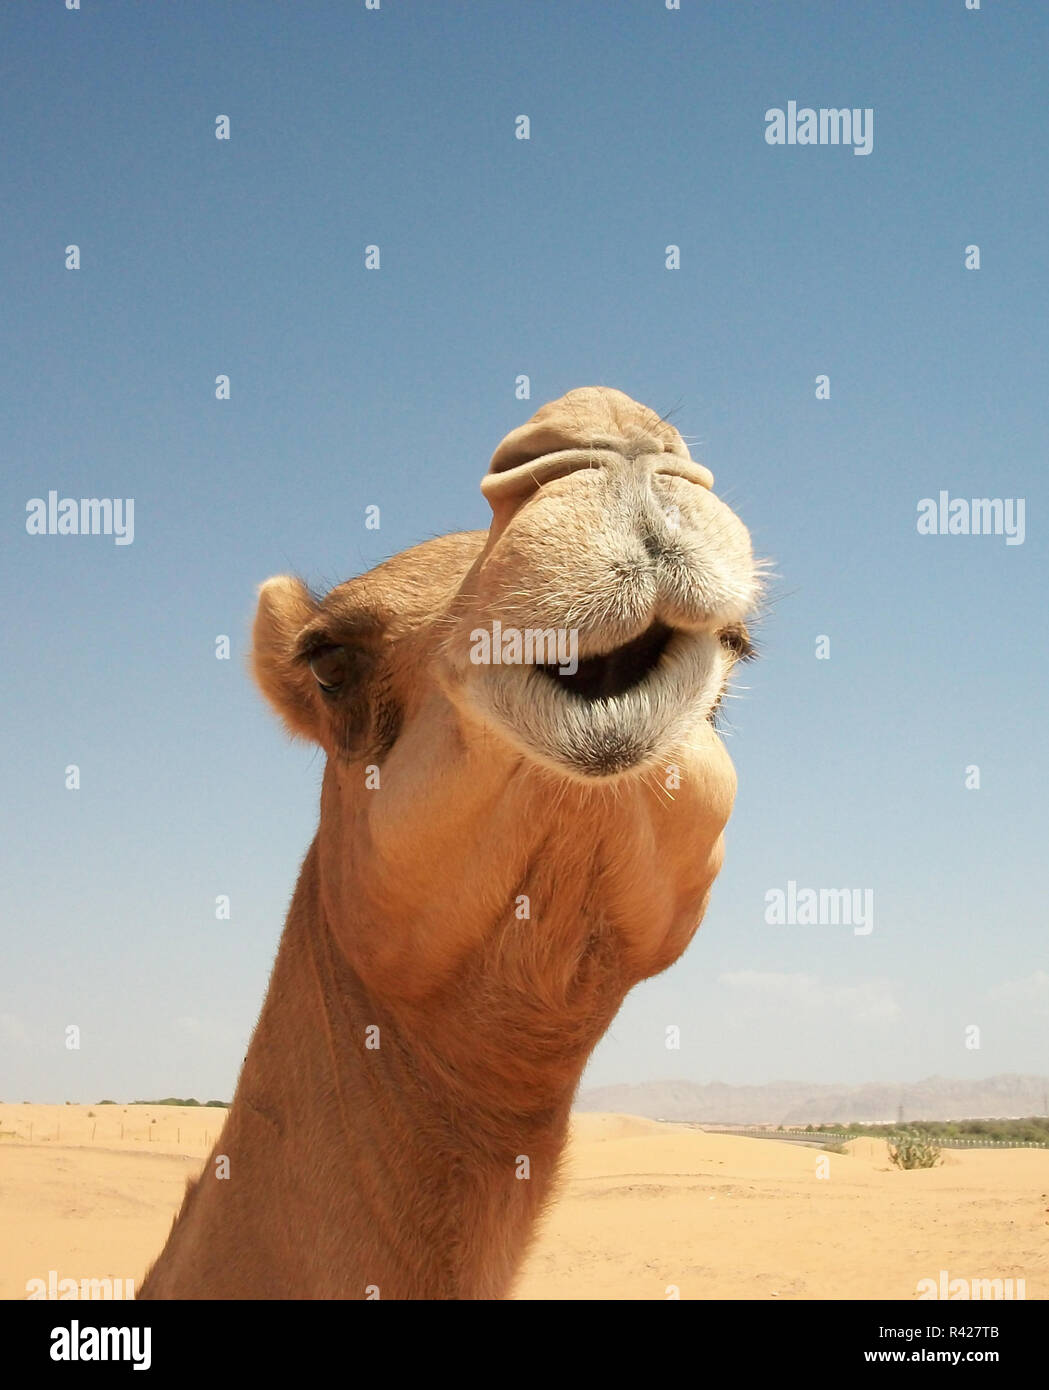 Camels in the desert Stock Photo